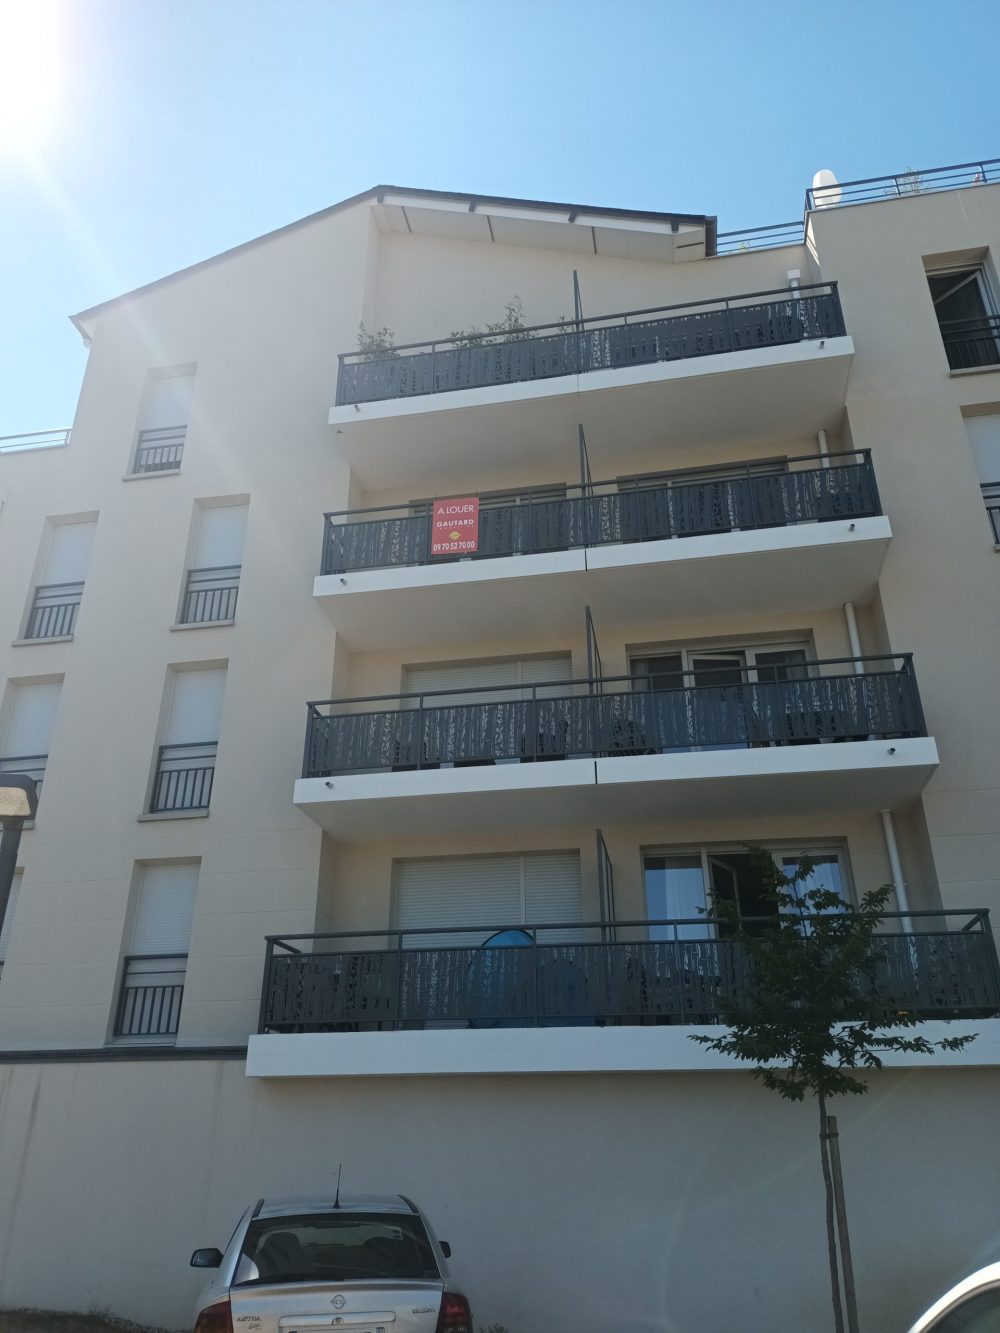 residence appartement tours nord